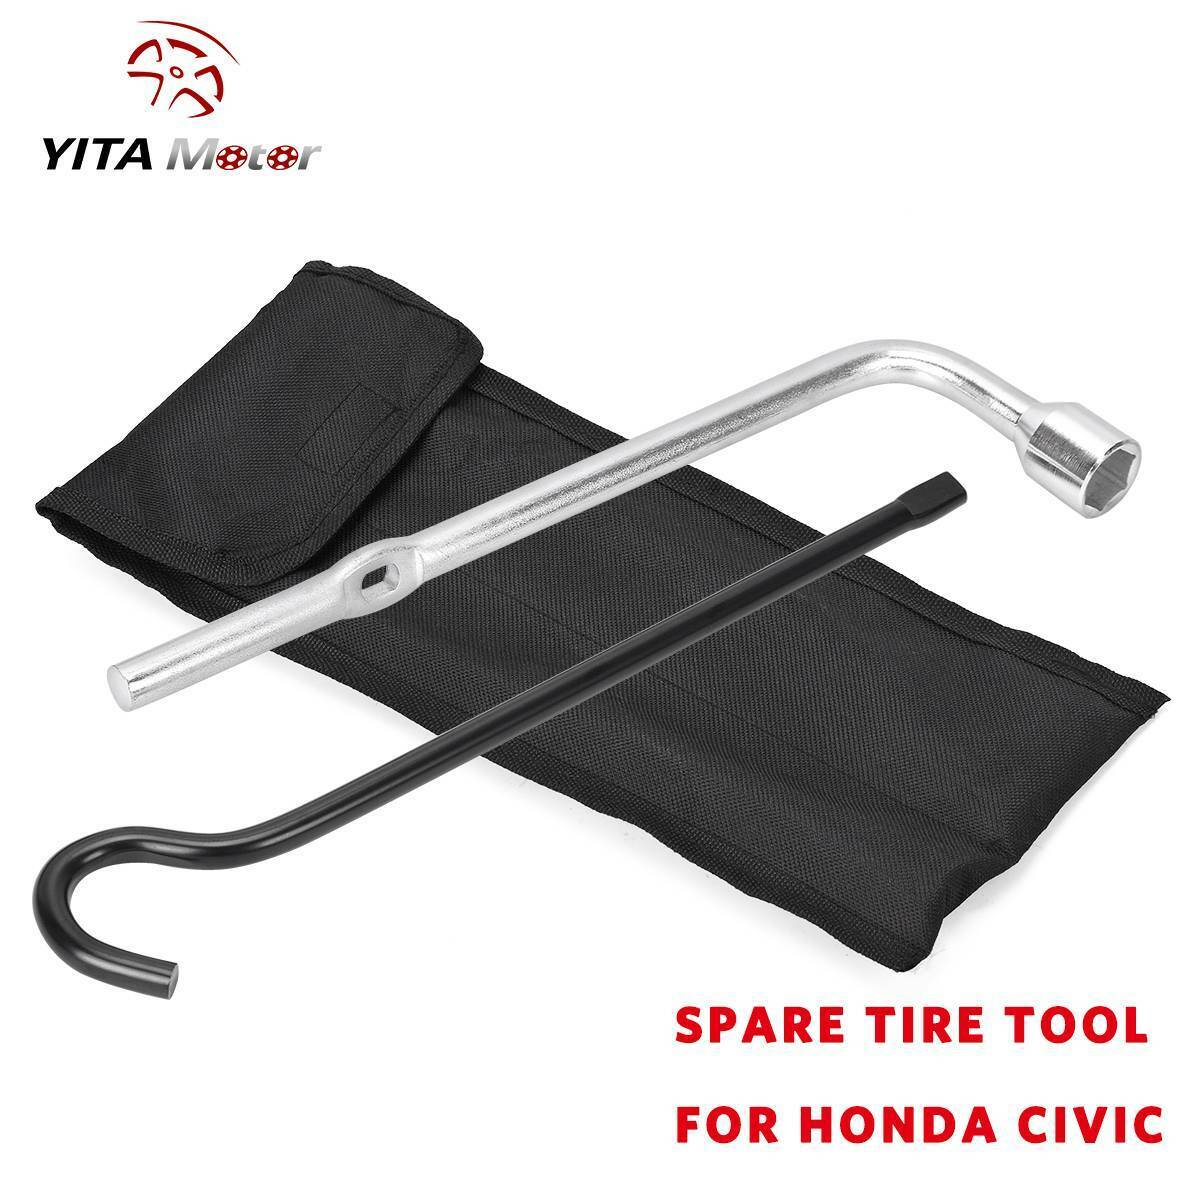 YITAMOTOR Replacement Jack Spare Tire Tool Set for Honda Accord Civic CR-V